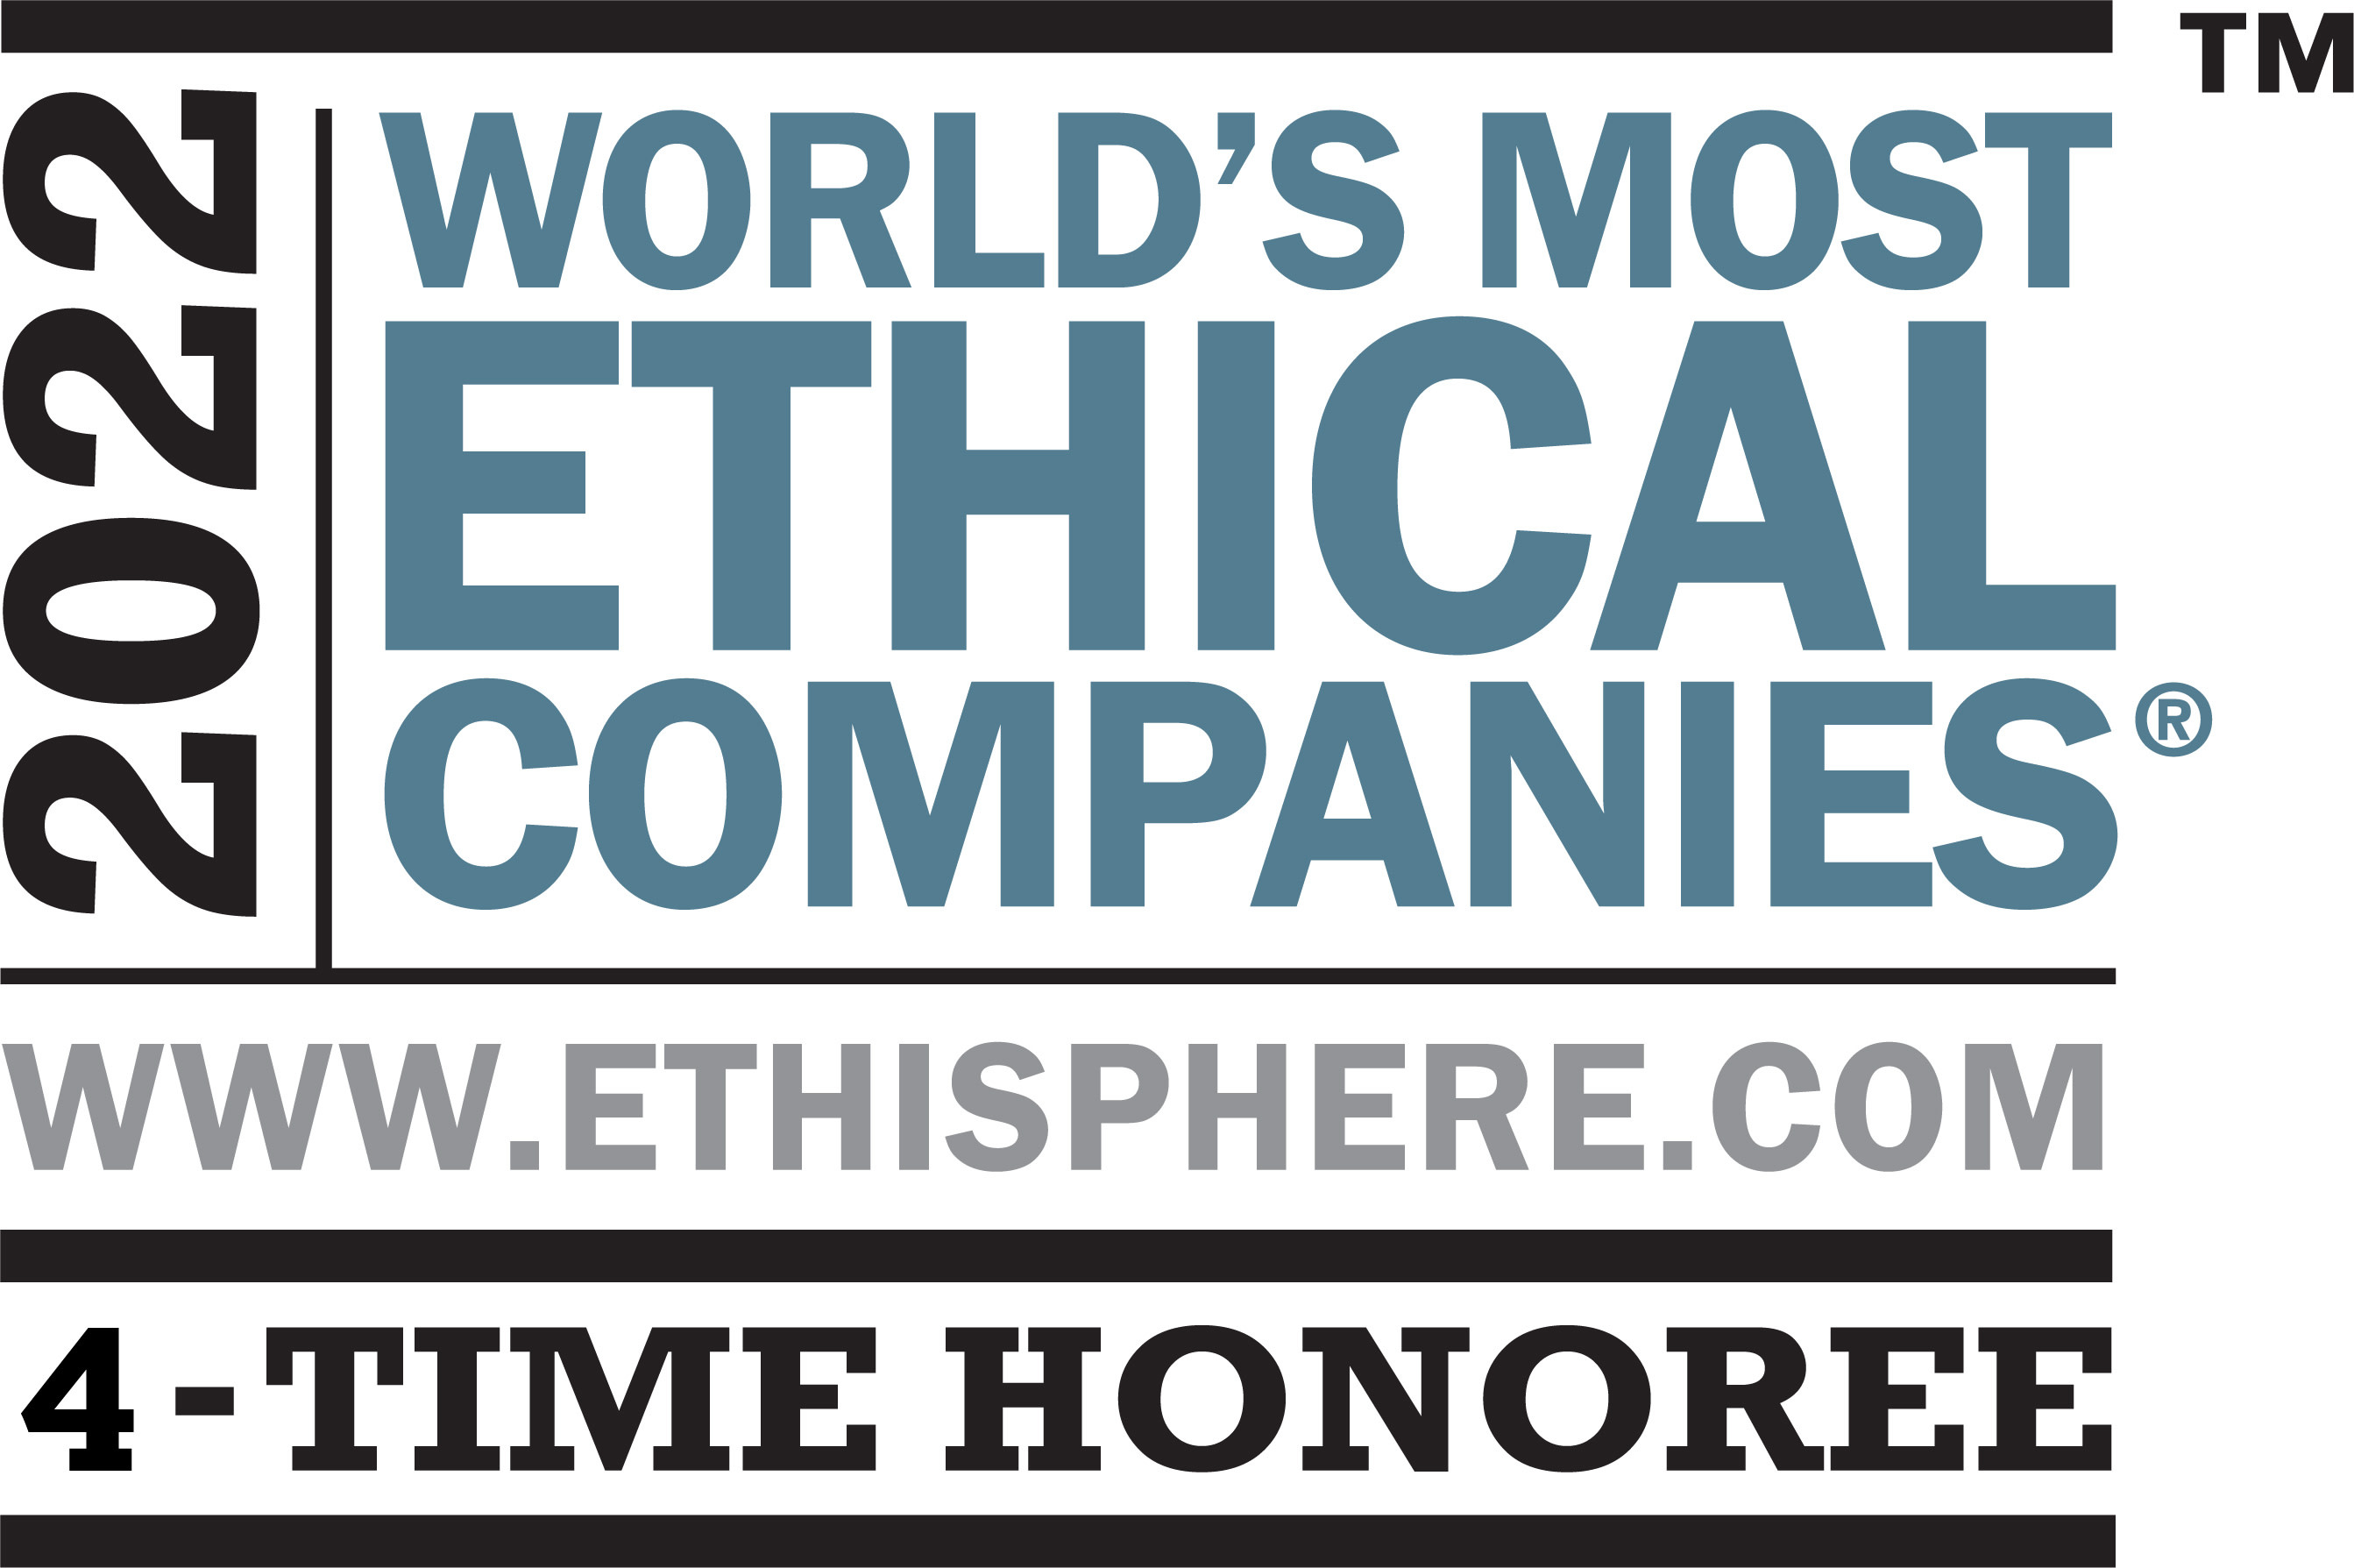 Western Digital Named One of World's Most Ethical Companies for Fourth Year